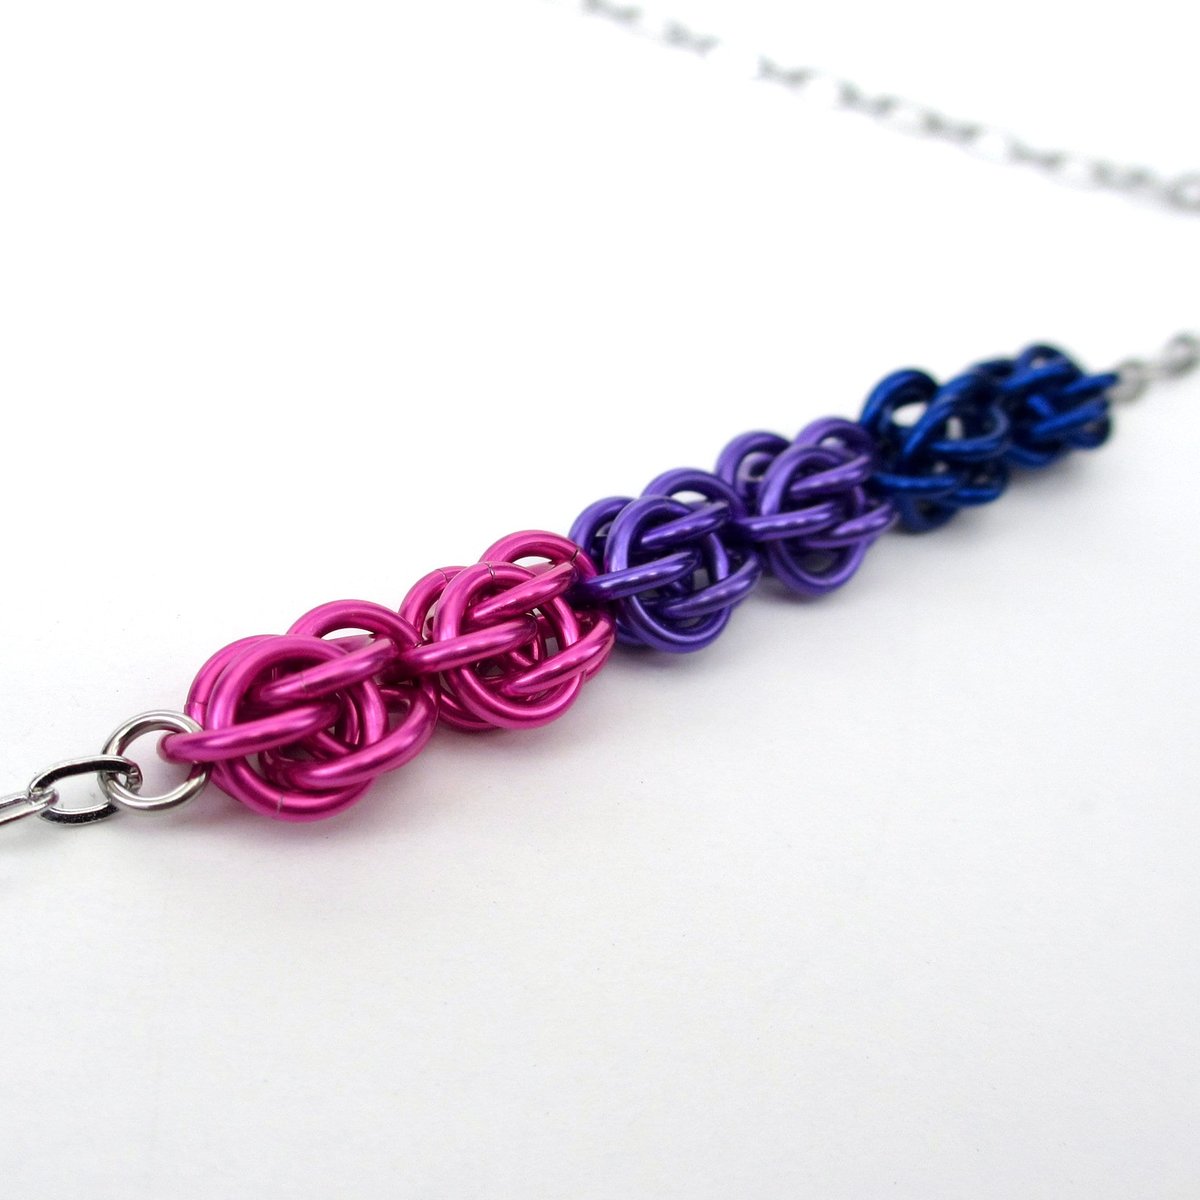 Bisexual pride necklace, chainmail Sweetpea weave LGBTQ jewelry, great gift for bi friends